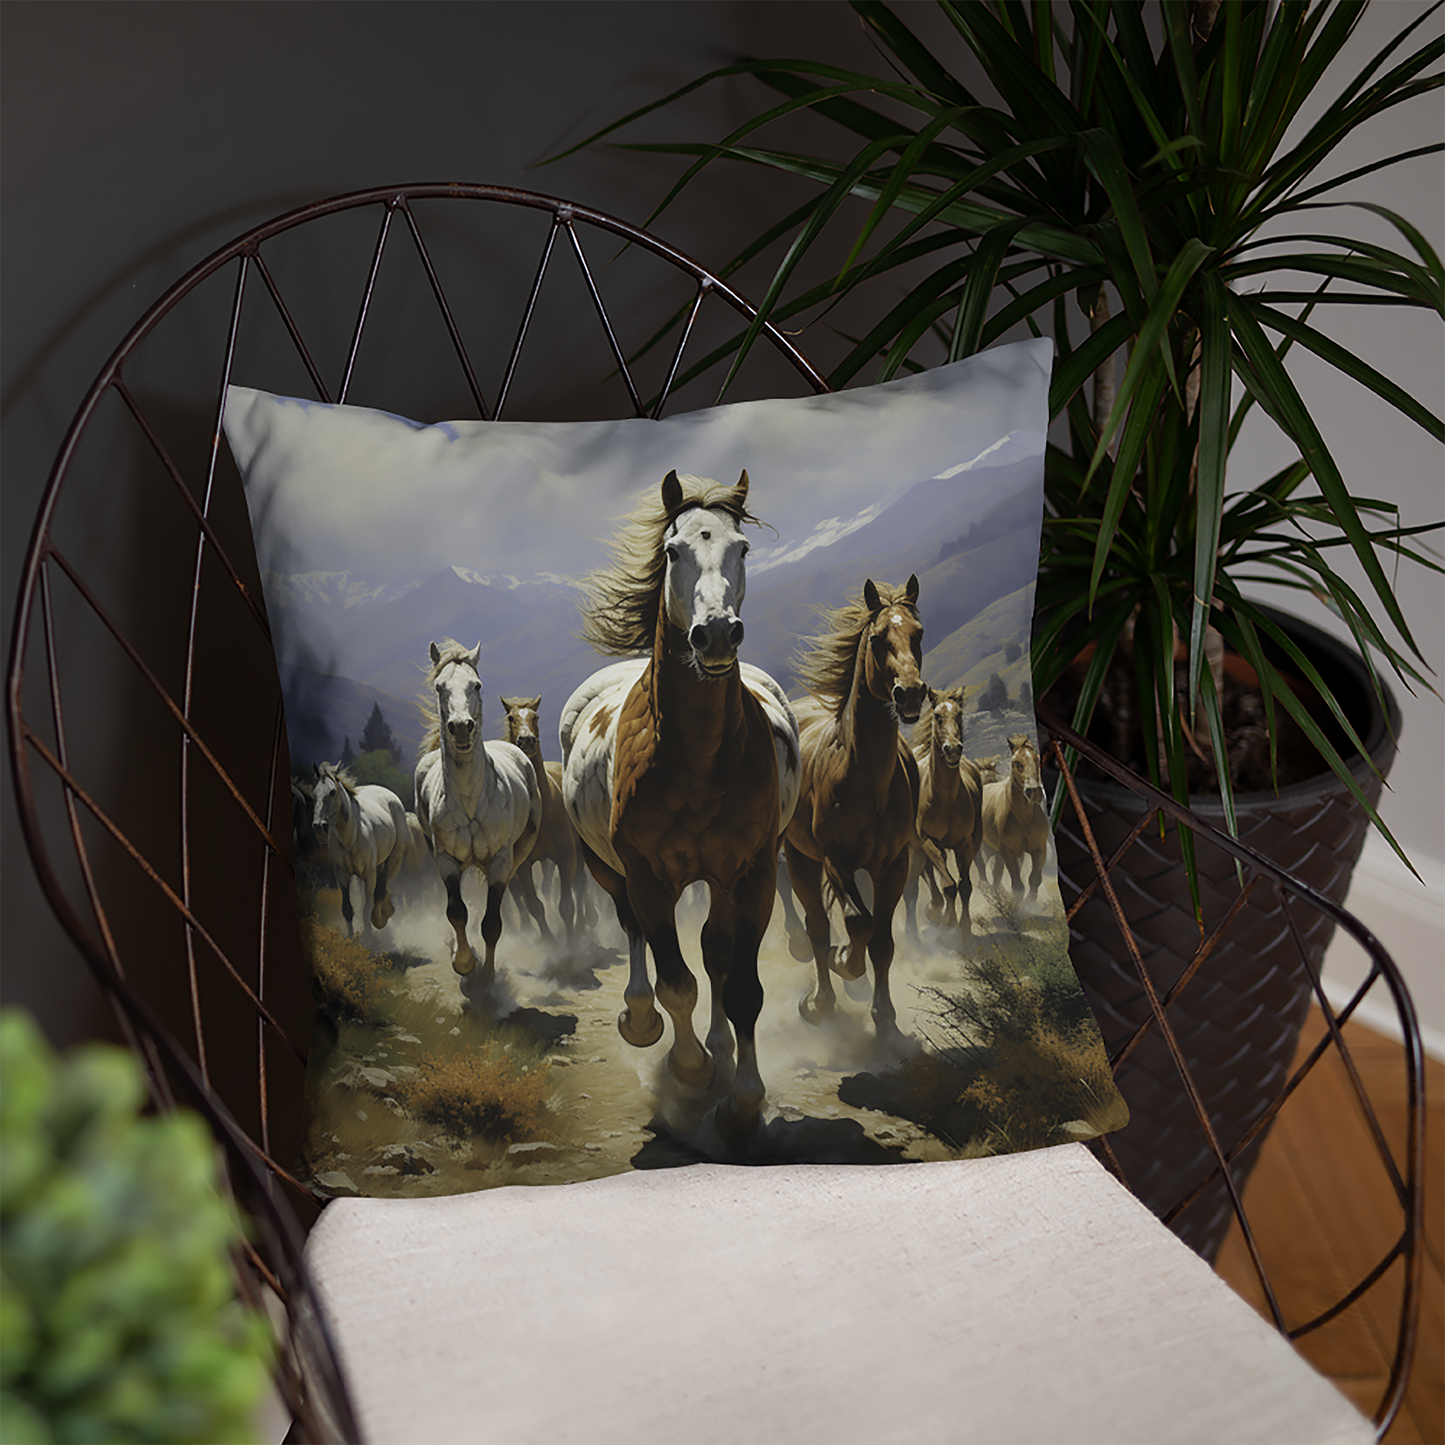 Horse Throw Pillow Galloping Herd Field Comfort Polyester Decorative Cushion 18x18